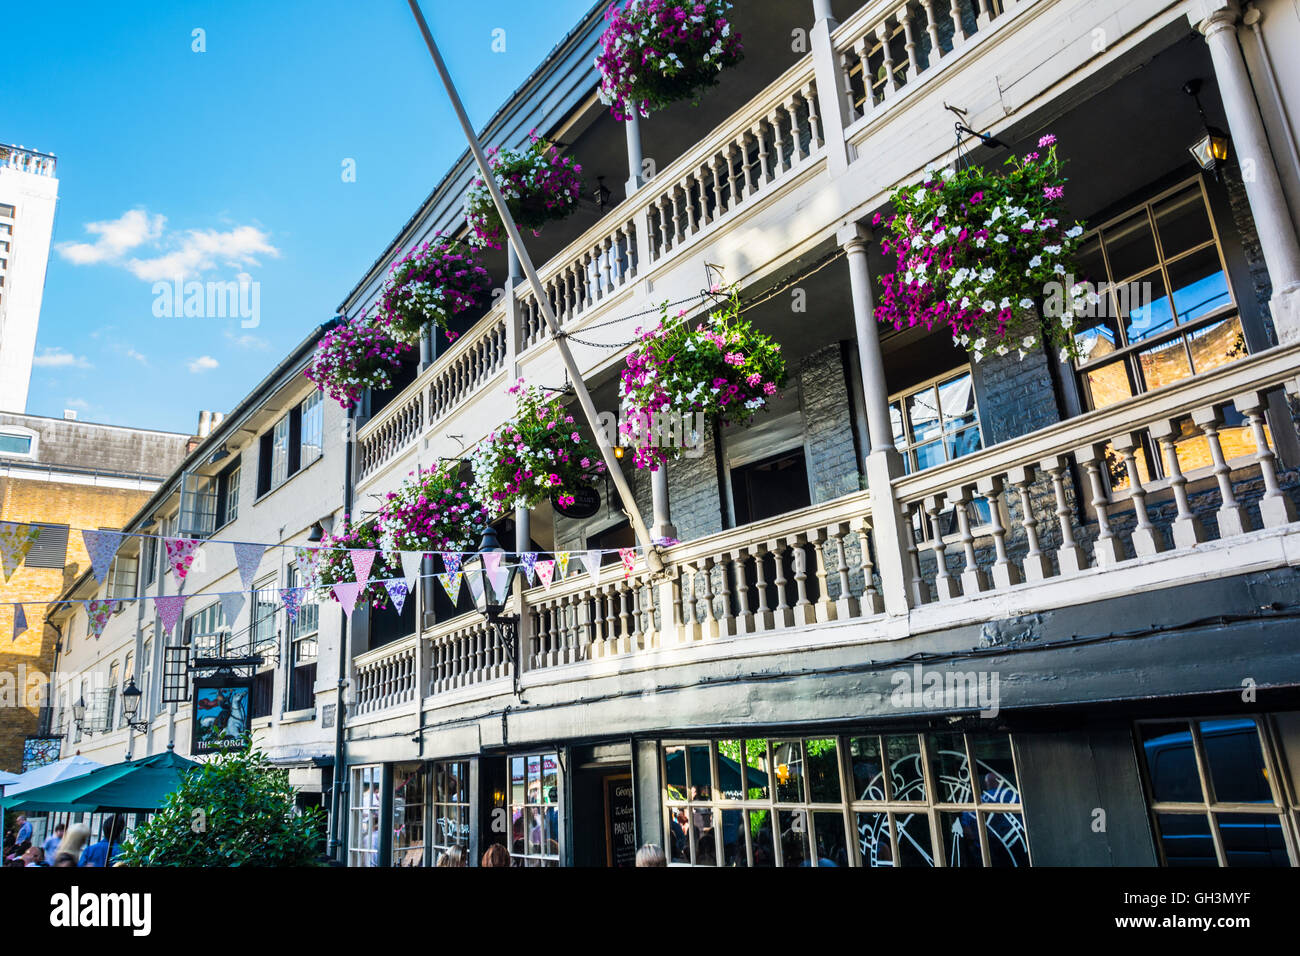 Exterior view of the ancient galleried George Inn in Southwark, London, England, U.K. Stock Photo